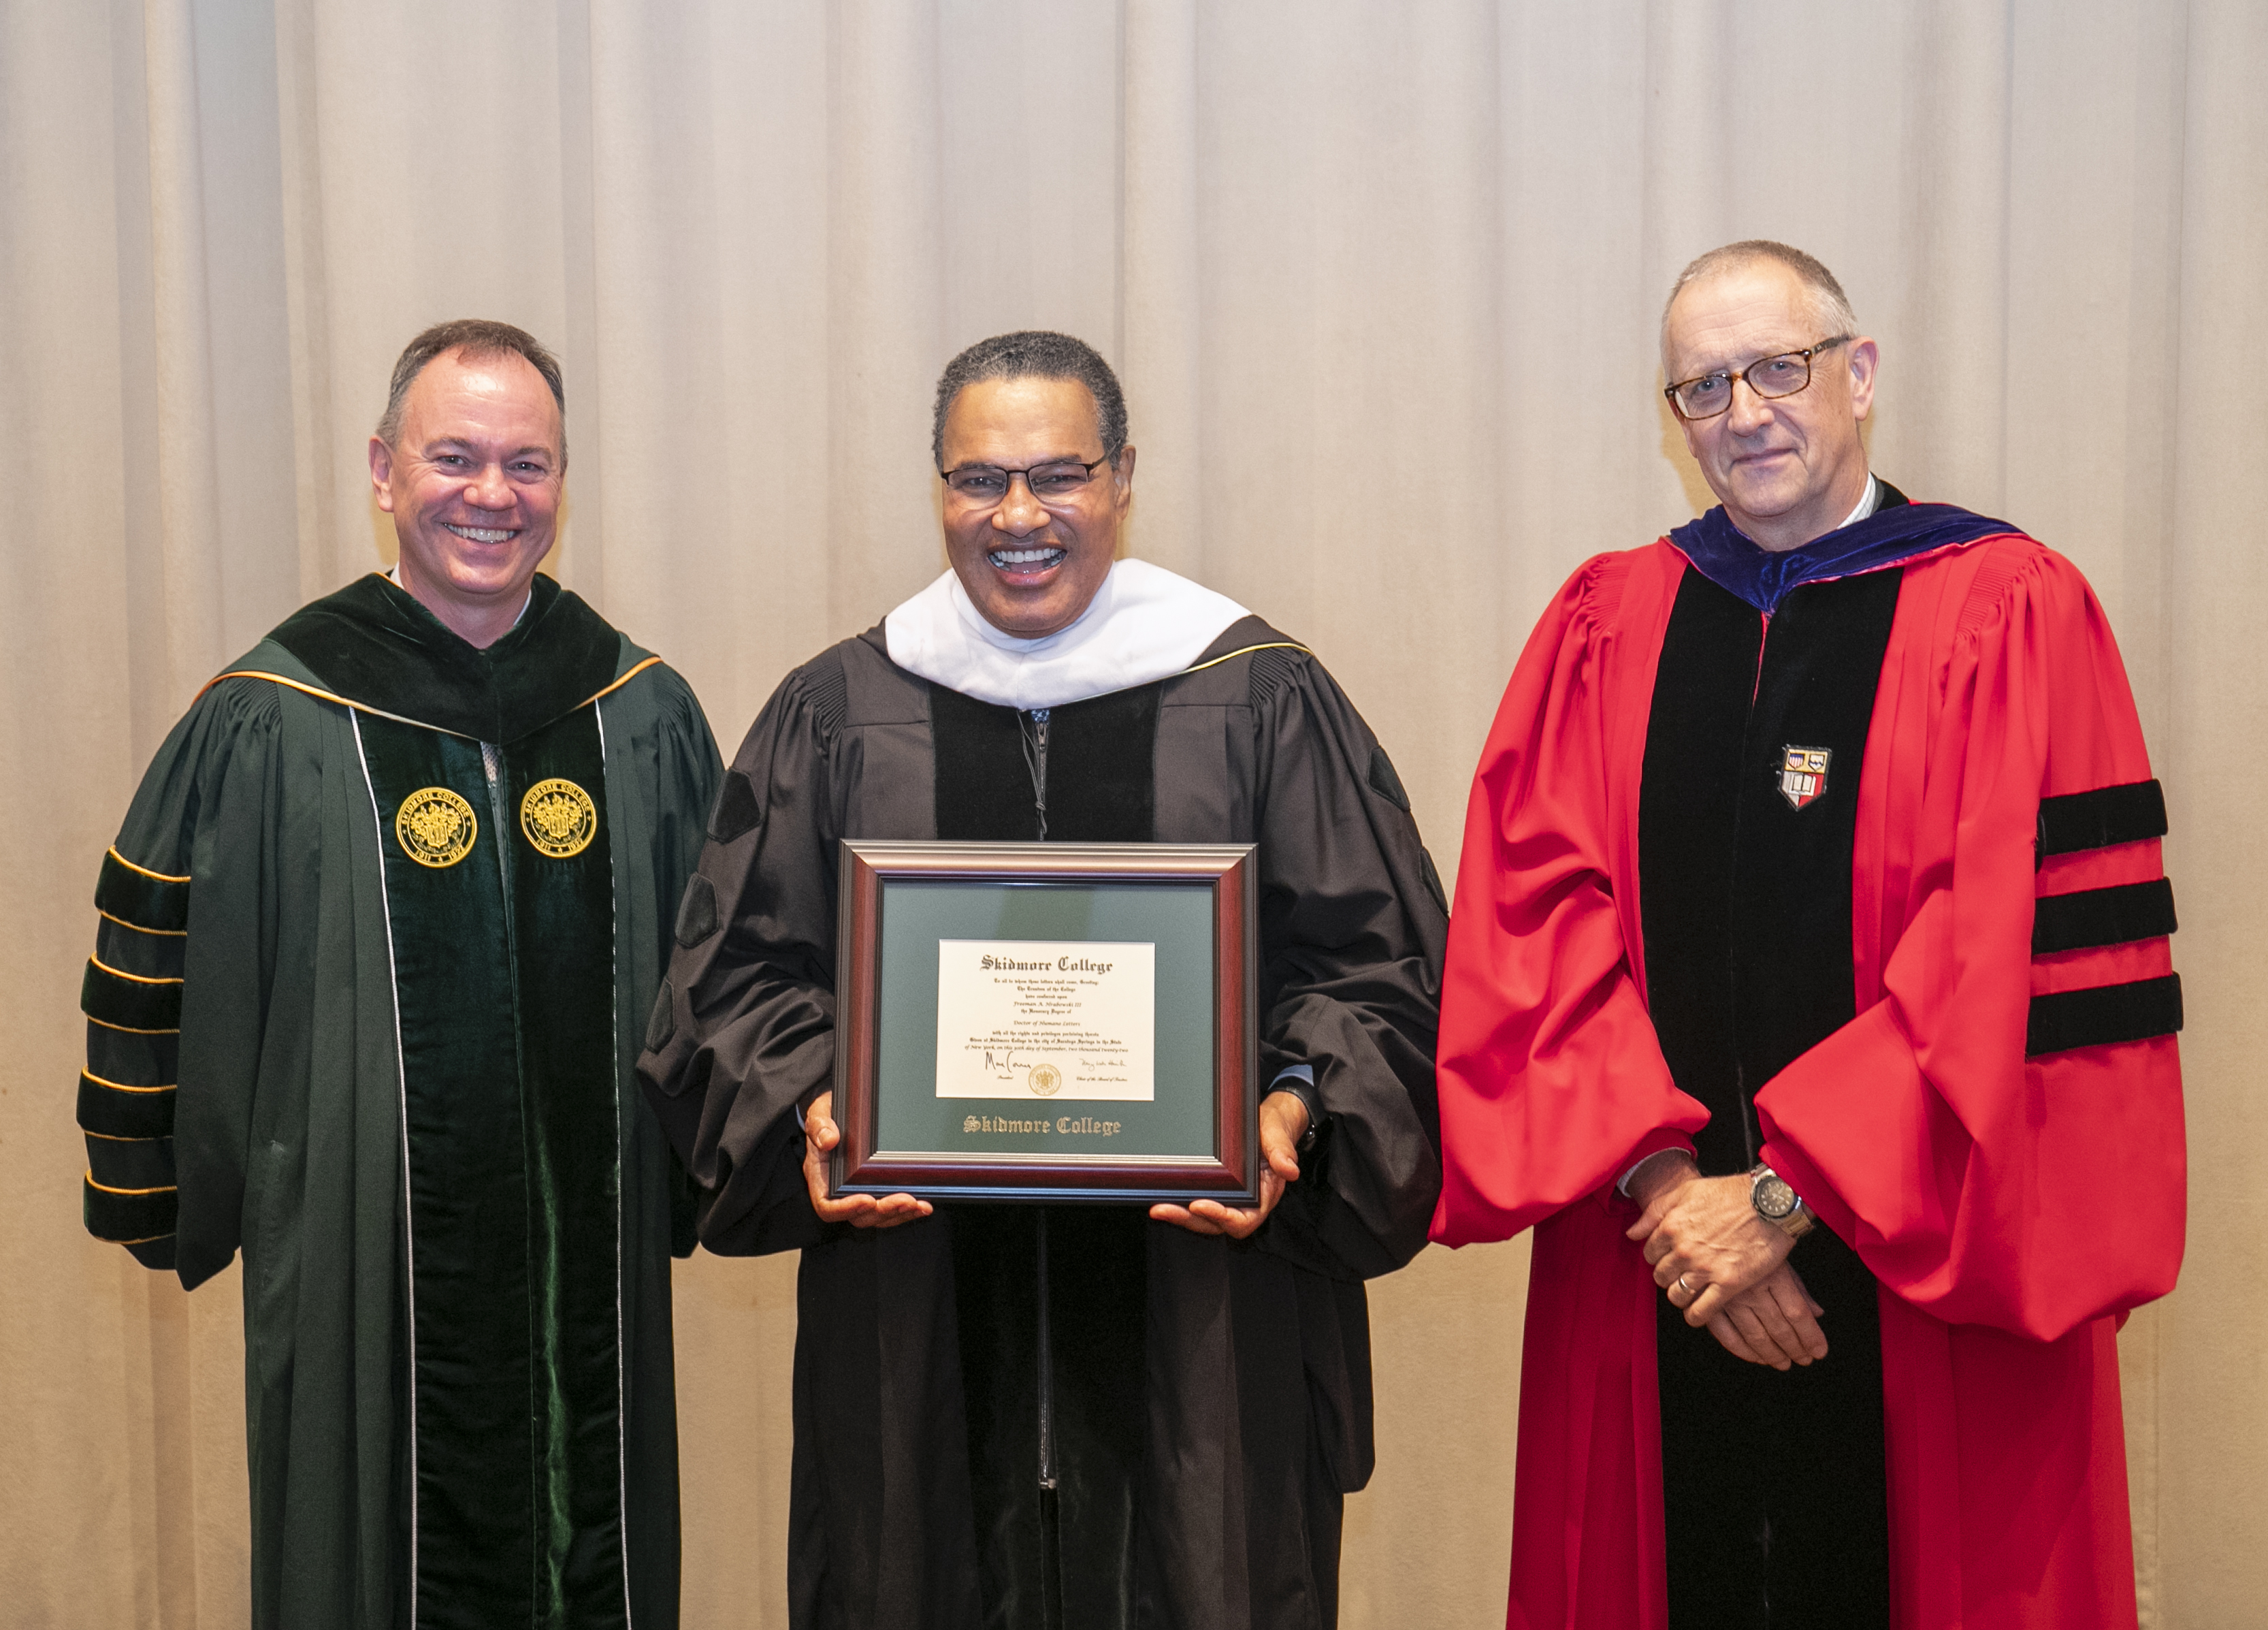 Freeman A. Hrabowski III, president emeritus of University of Maryland, Baltimore County, center, stands with Skidmore College President Marc C. Conner, left, and Dean of Faculty and Vice President for Academic Affairs Michael Orr after receiving an honorary degree from Skidmore. 